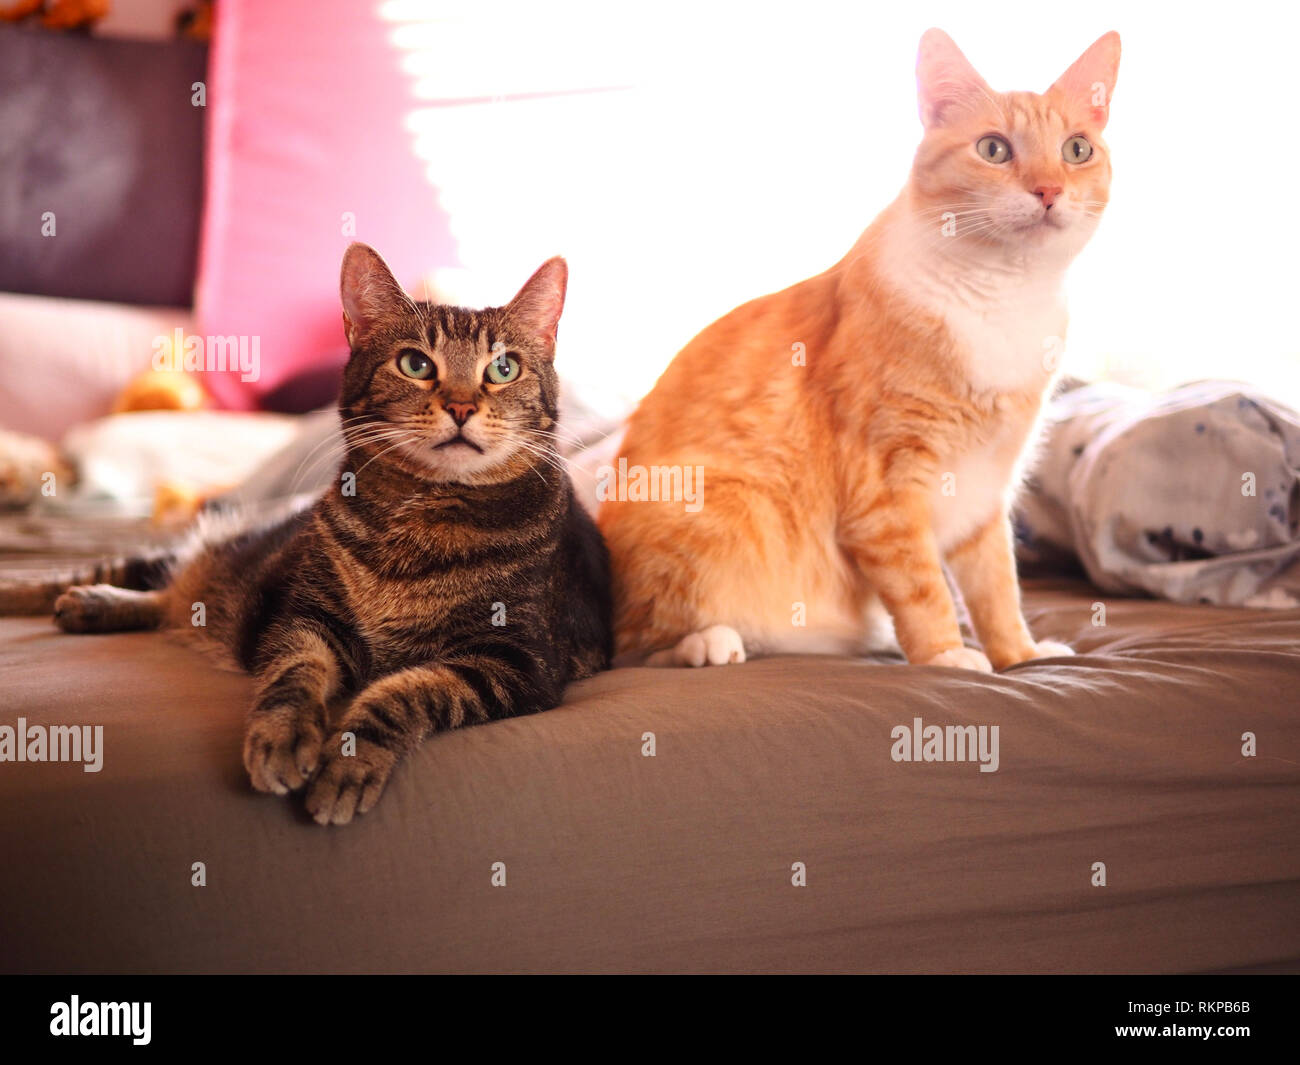 Mintie the tabby and Mika the orange tabby looking up Stock Photo